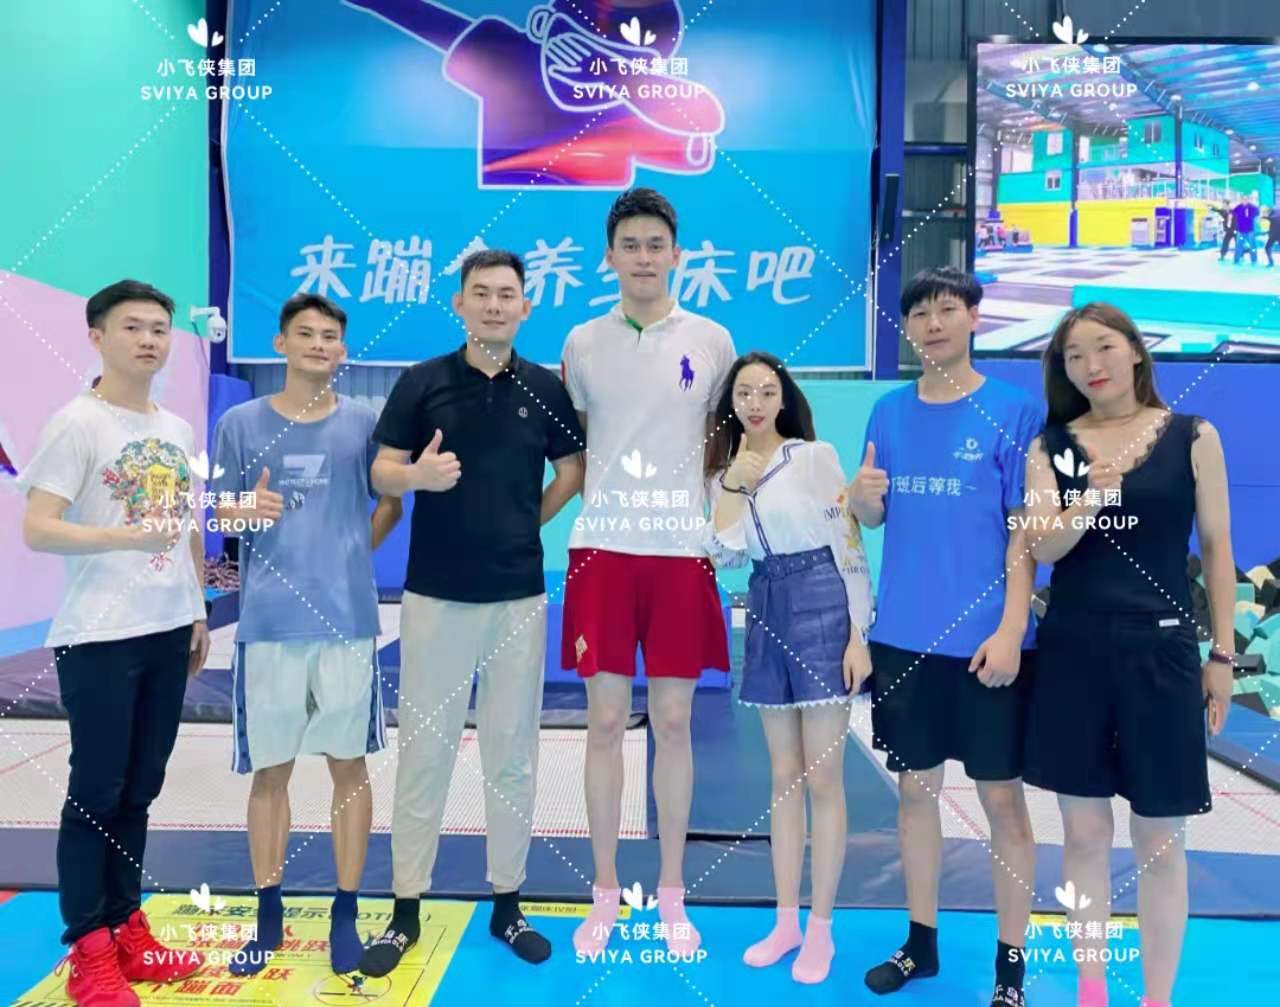 Olympic Champion Mr Sun Yang Visited The Trampoline Park Built By Xiaofeixia Group